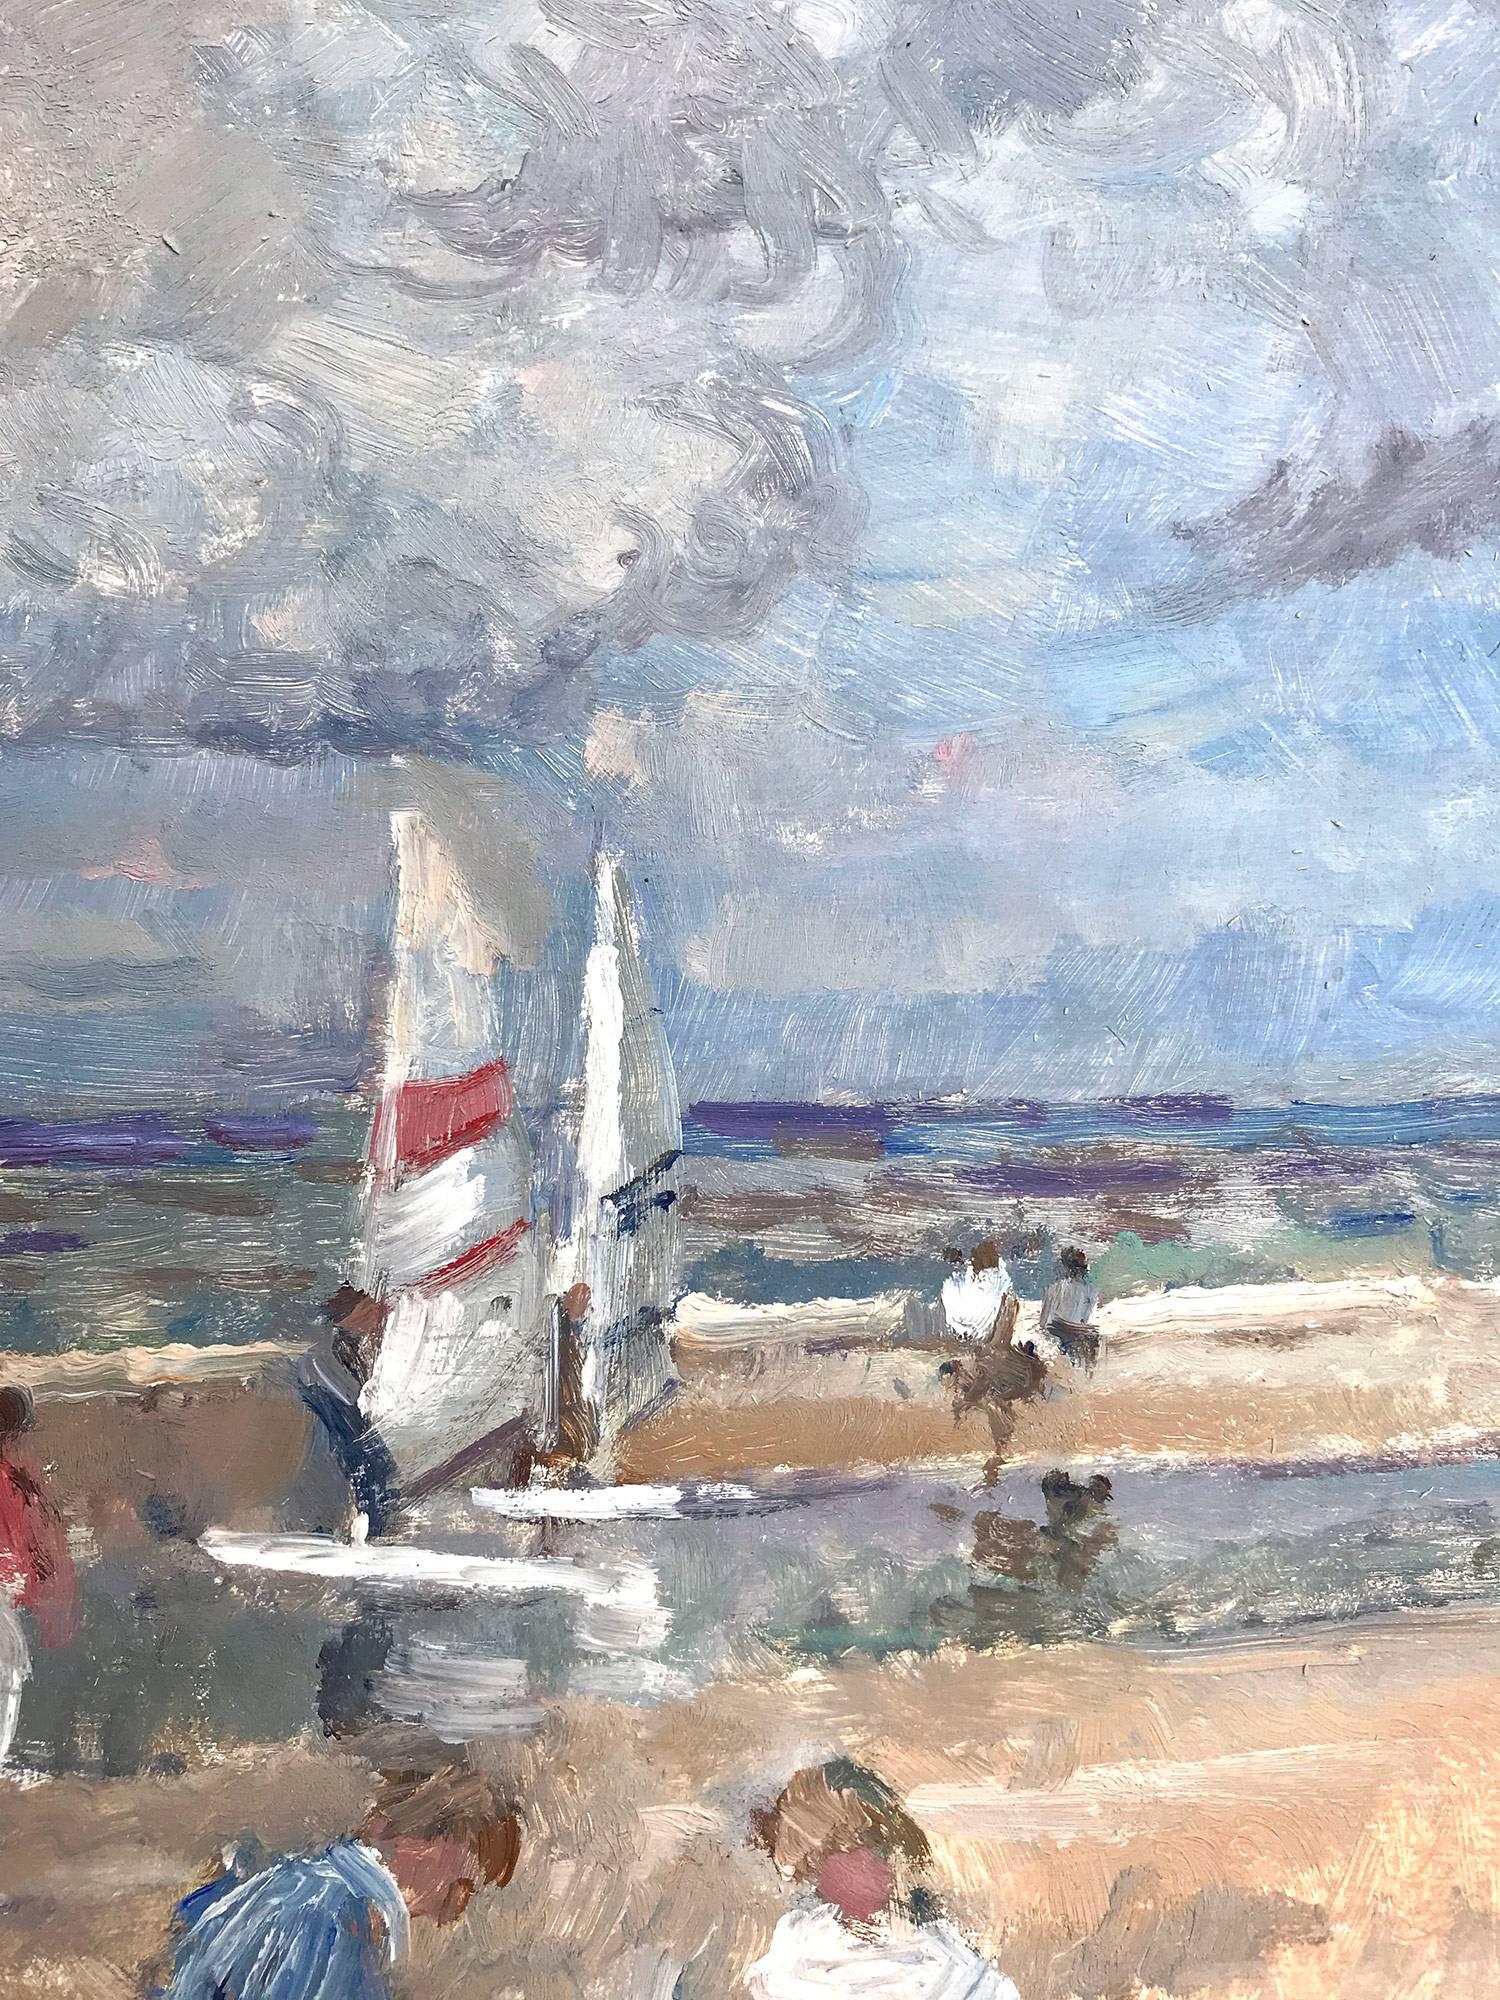 Beach Scene with Figures and Sailing Boats - Brown Figurative Painting by Arie C. Van Noort